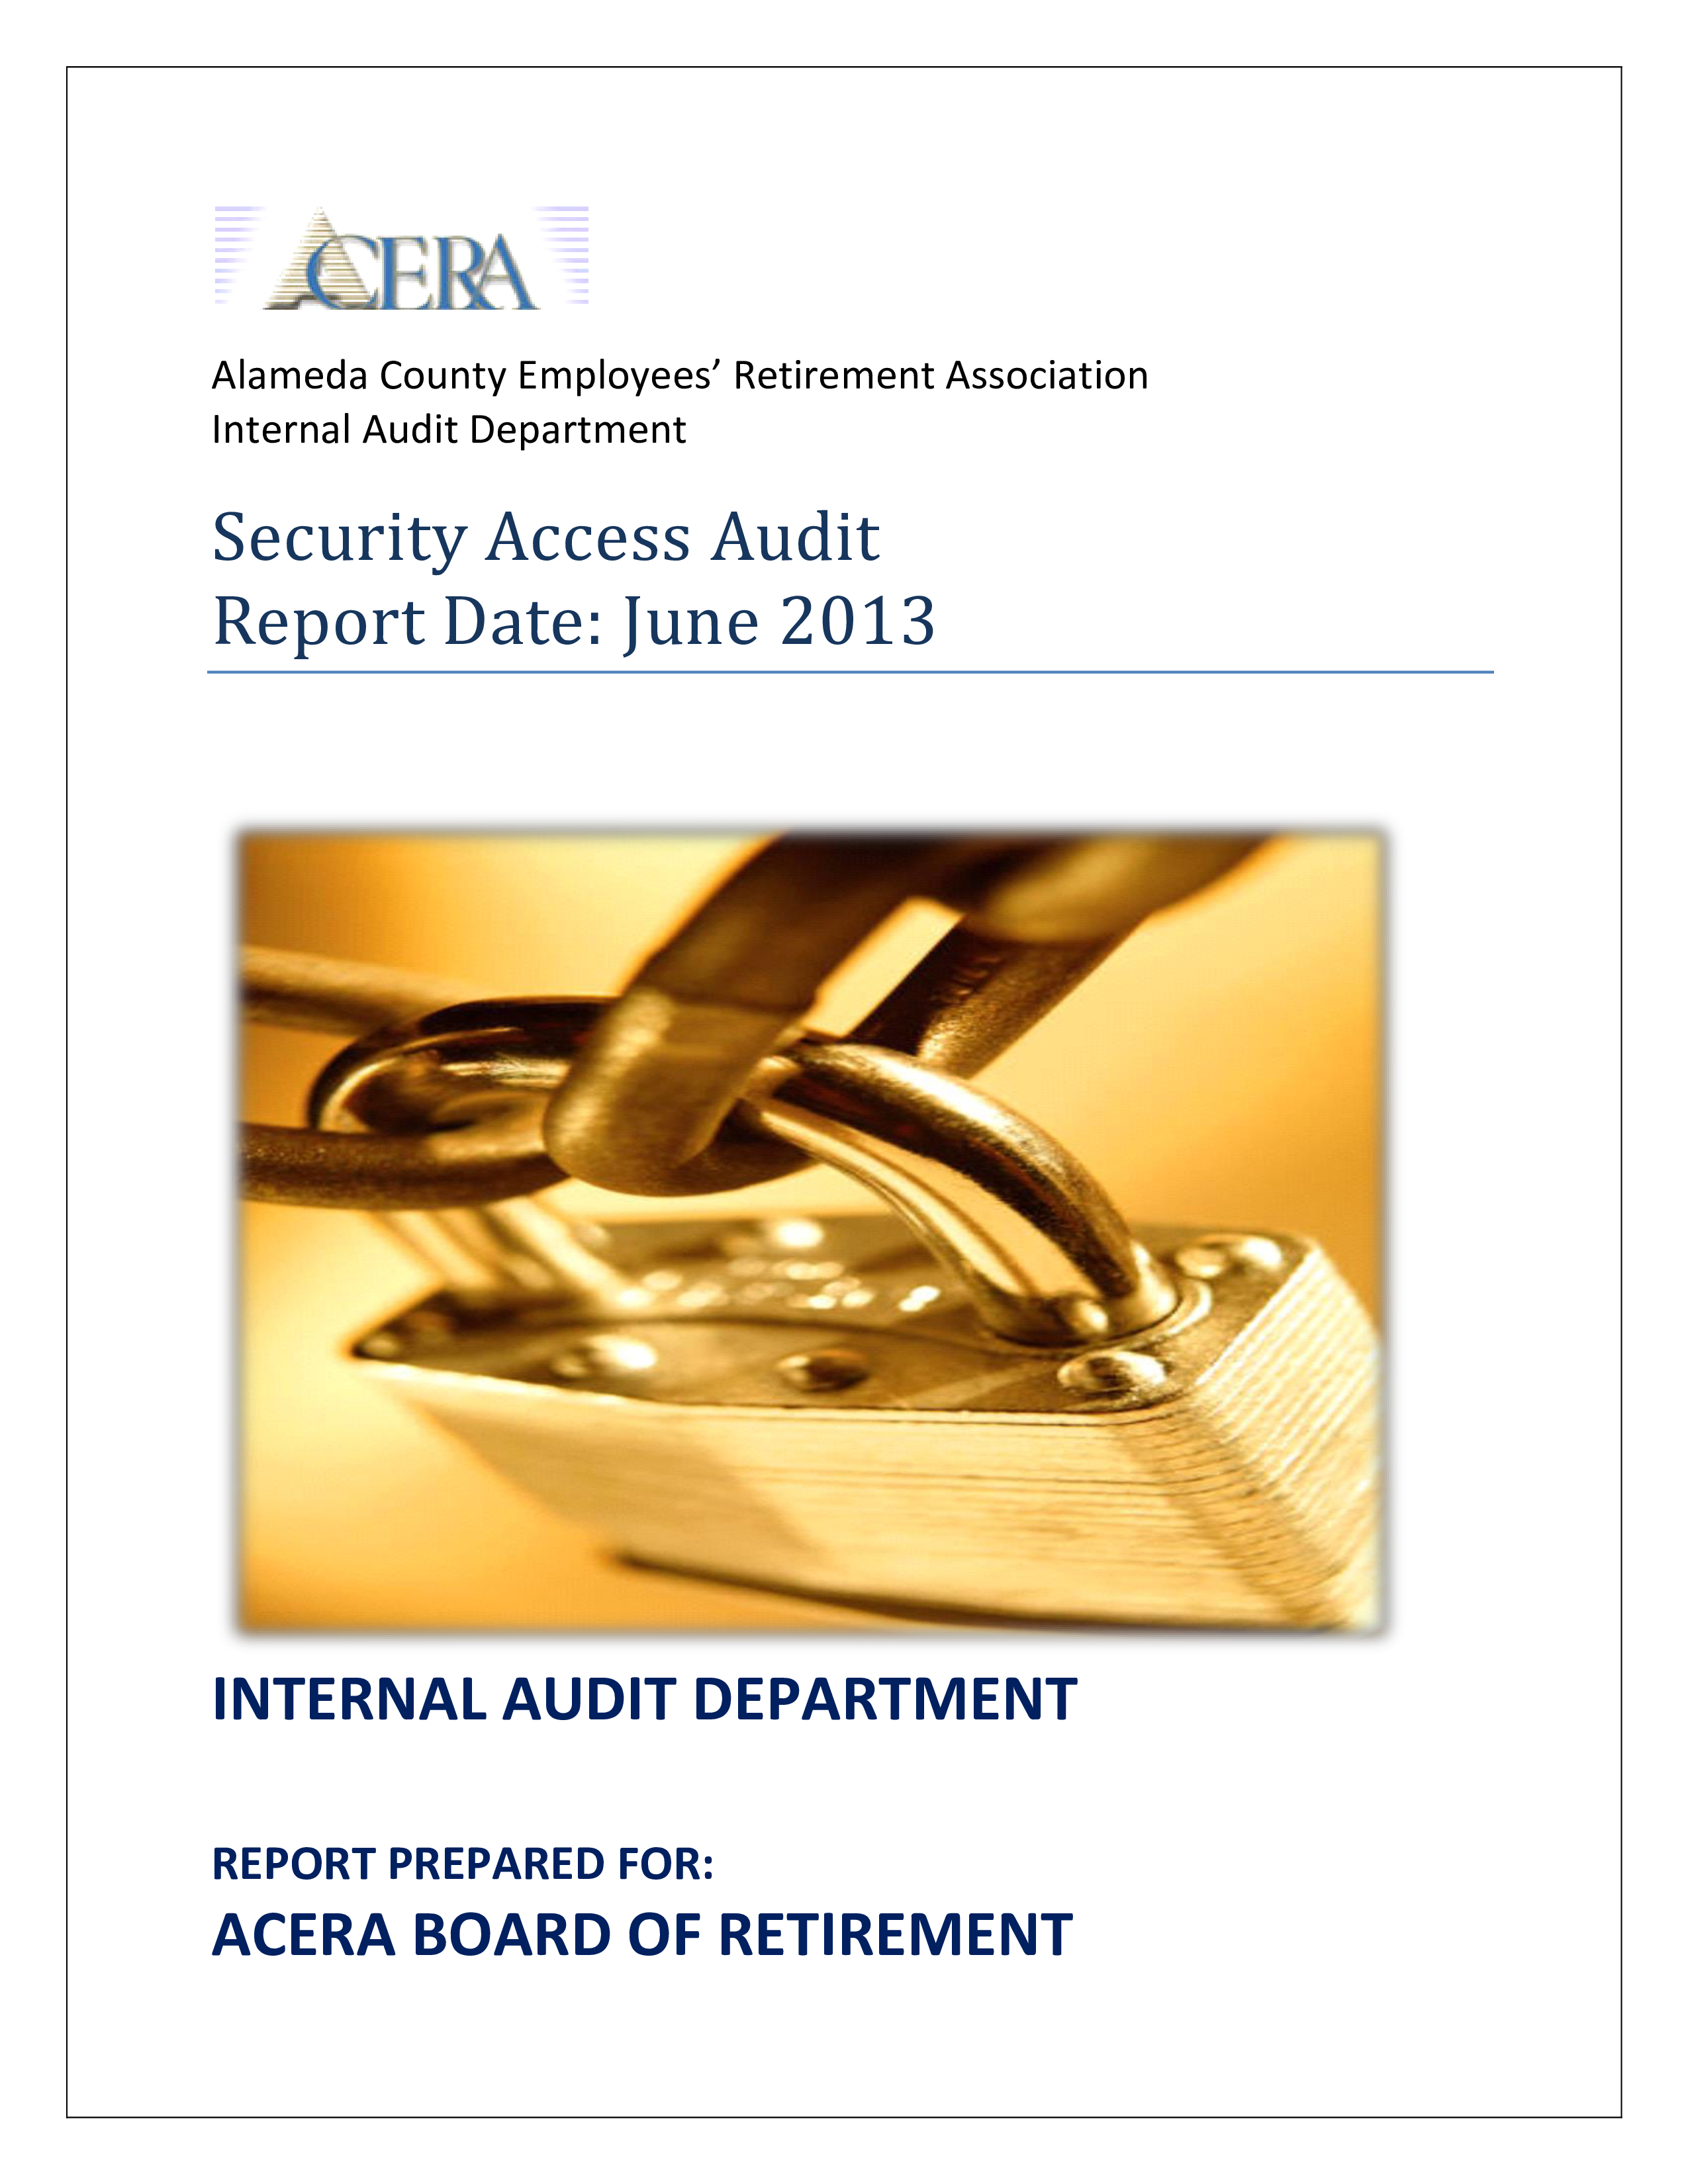 Security Access Audit Report main image